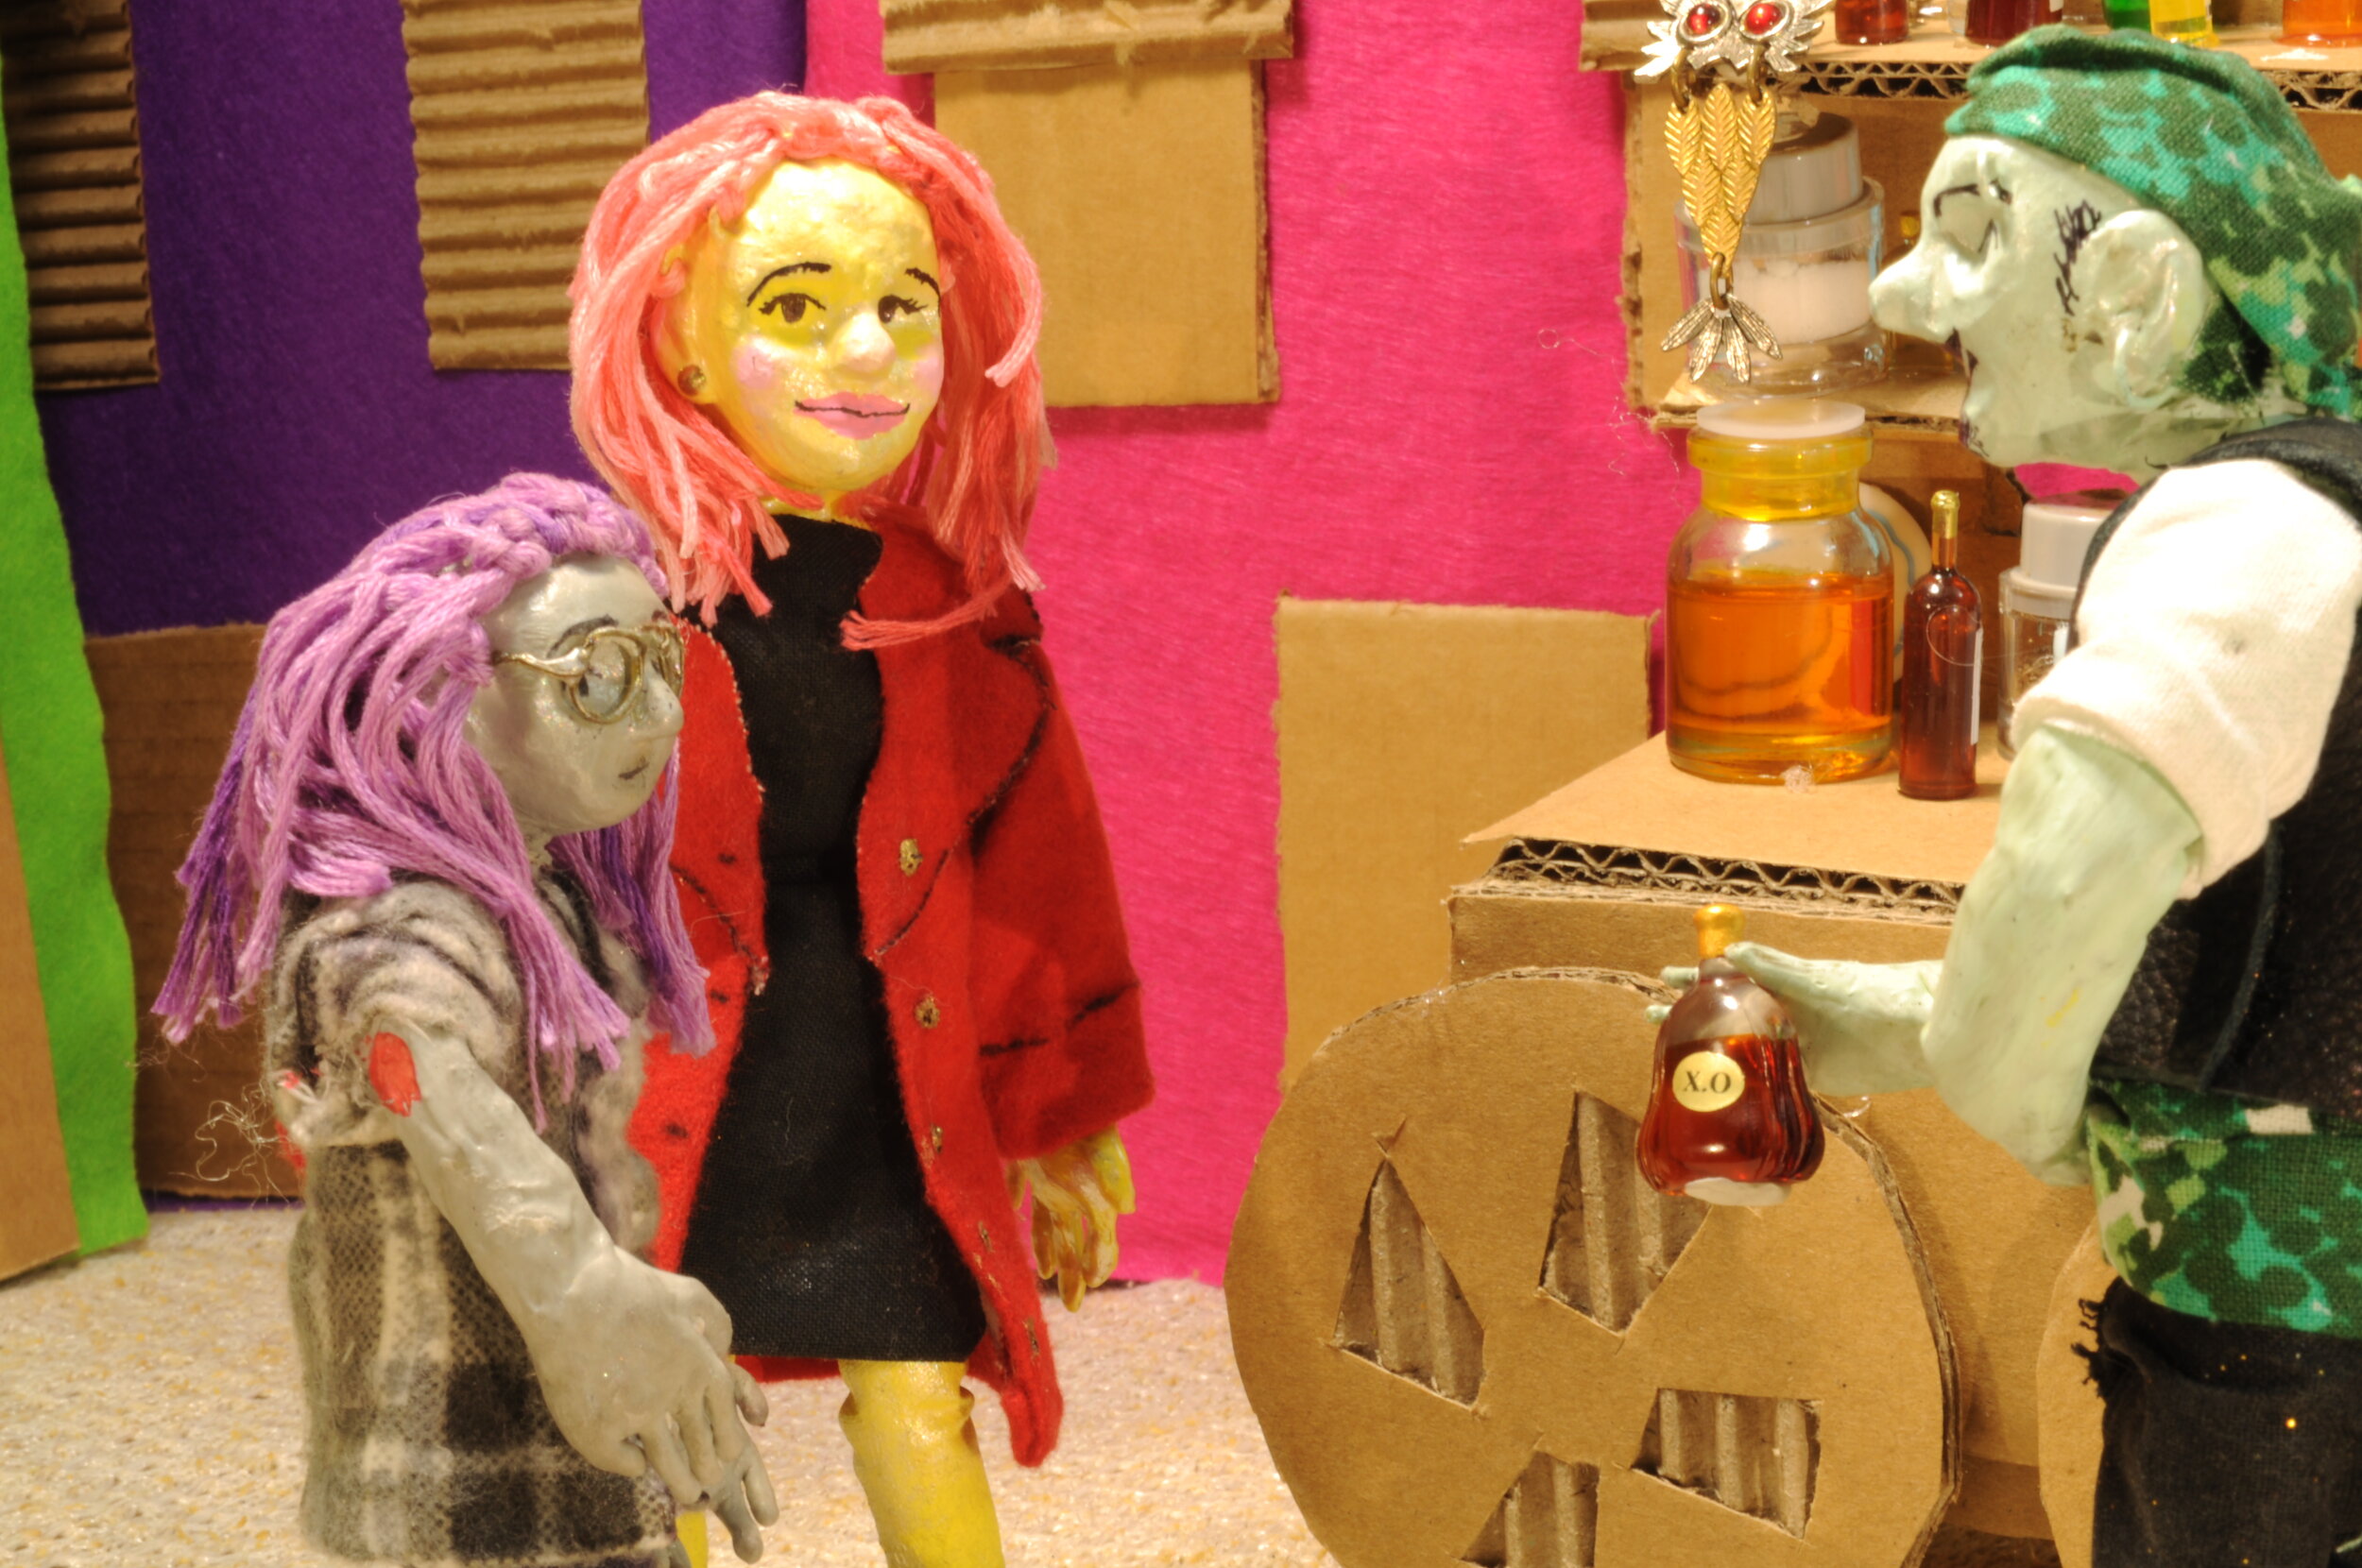  A claymation scene of a mother and daughter speaking to a potion master. Mother with pink hair and a red coat is standing to the left with her daughter with purple hair and glasses next to her. On the right side is the potion master with a green ban